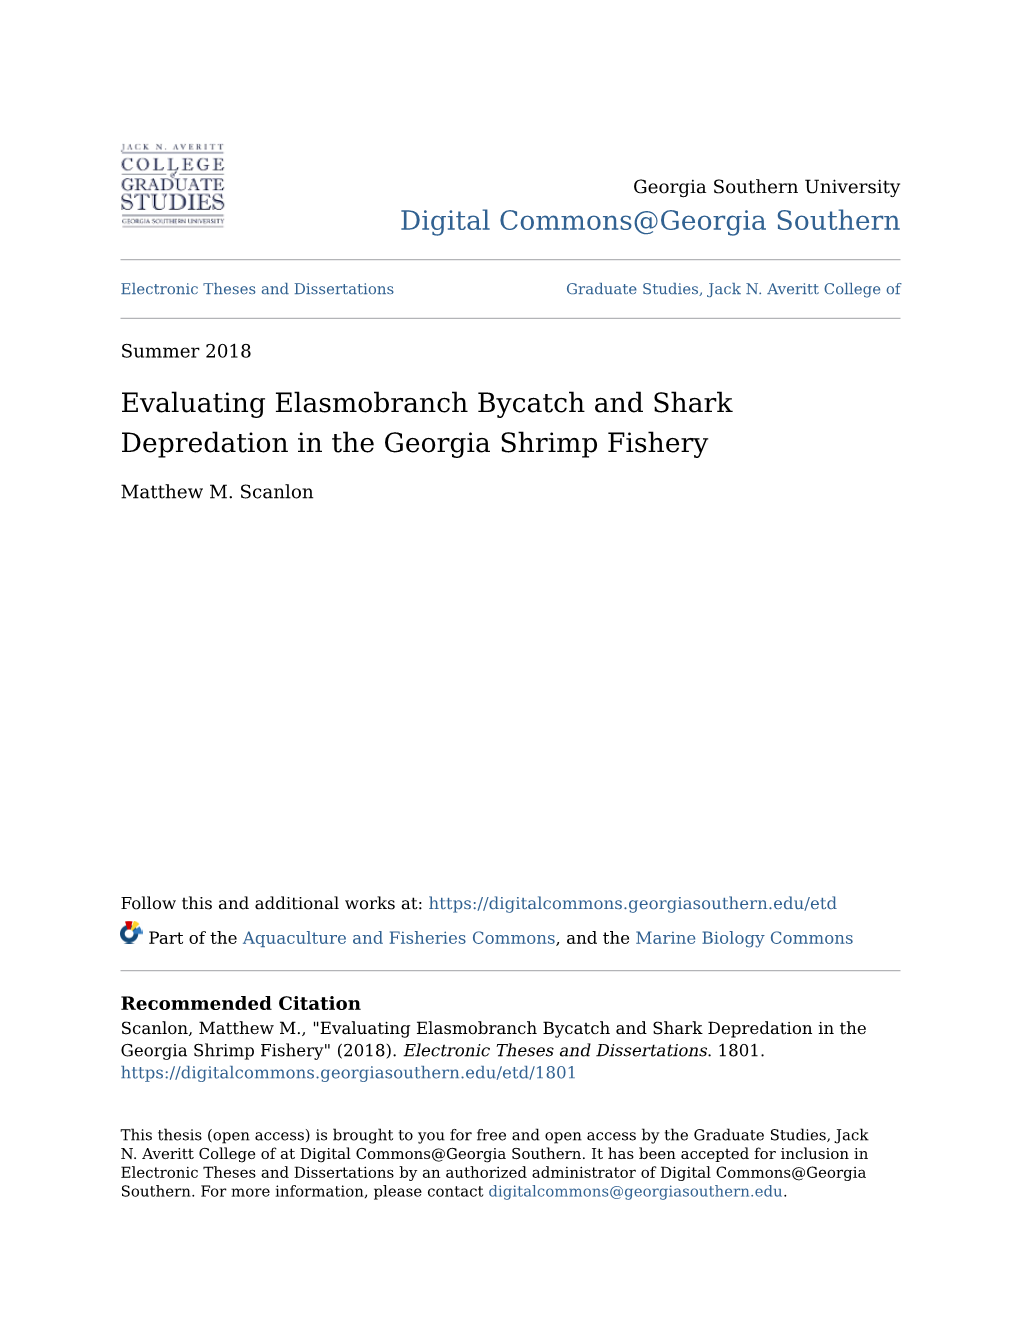 Evaluating Elasmobranch Bycatch and Shark Depredation in the Georgia Shrimp Fishery